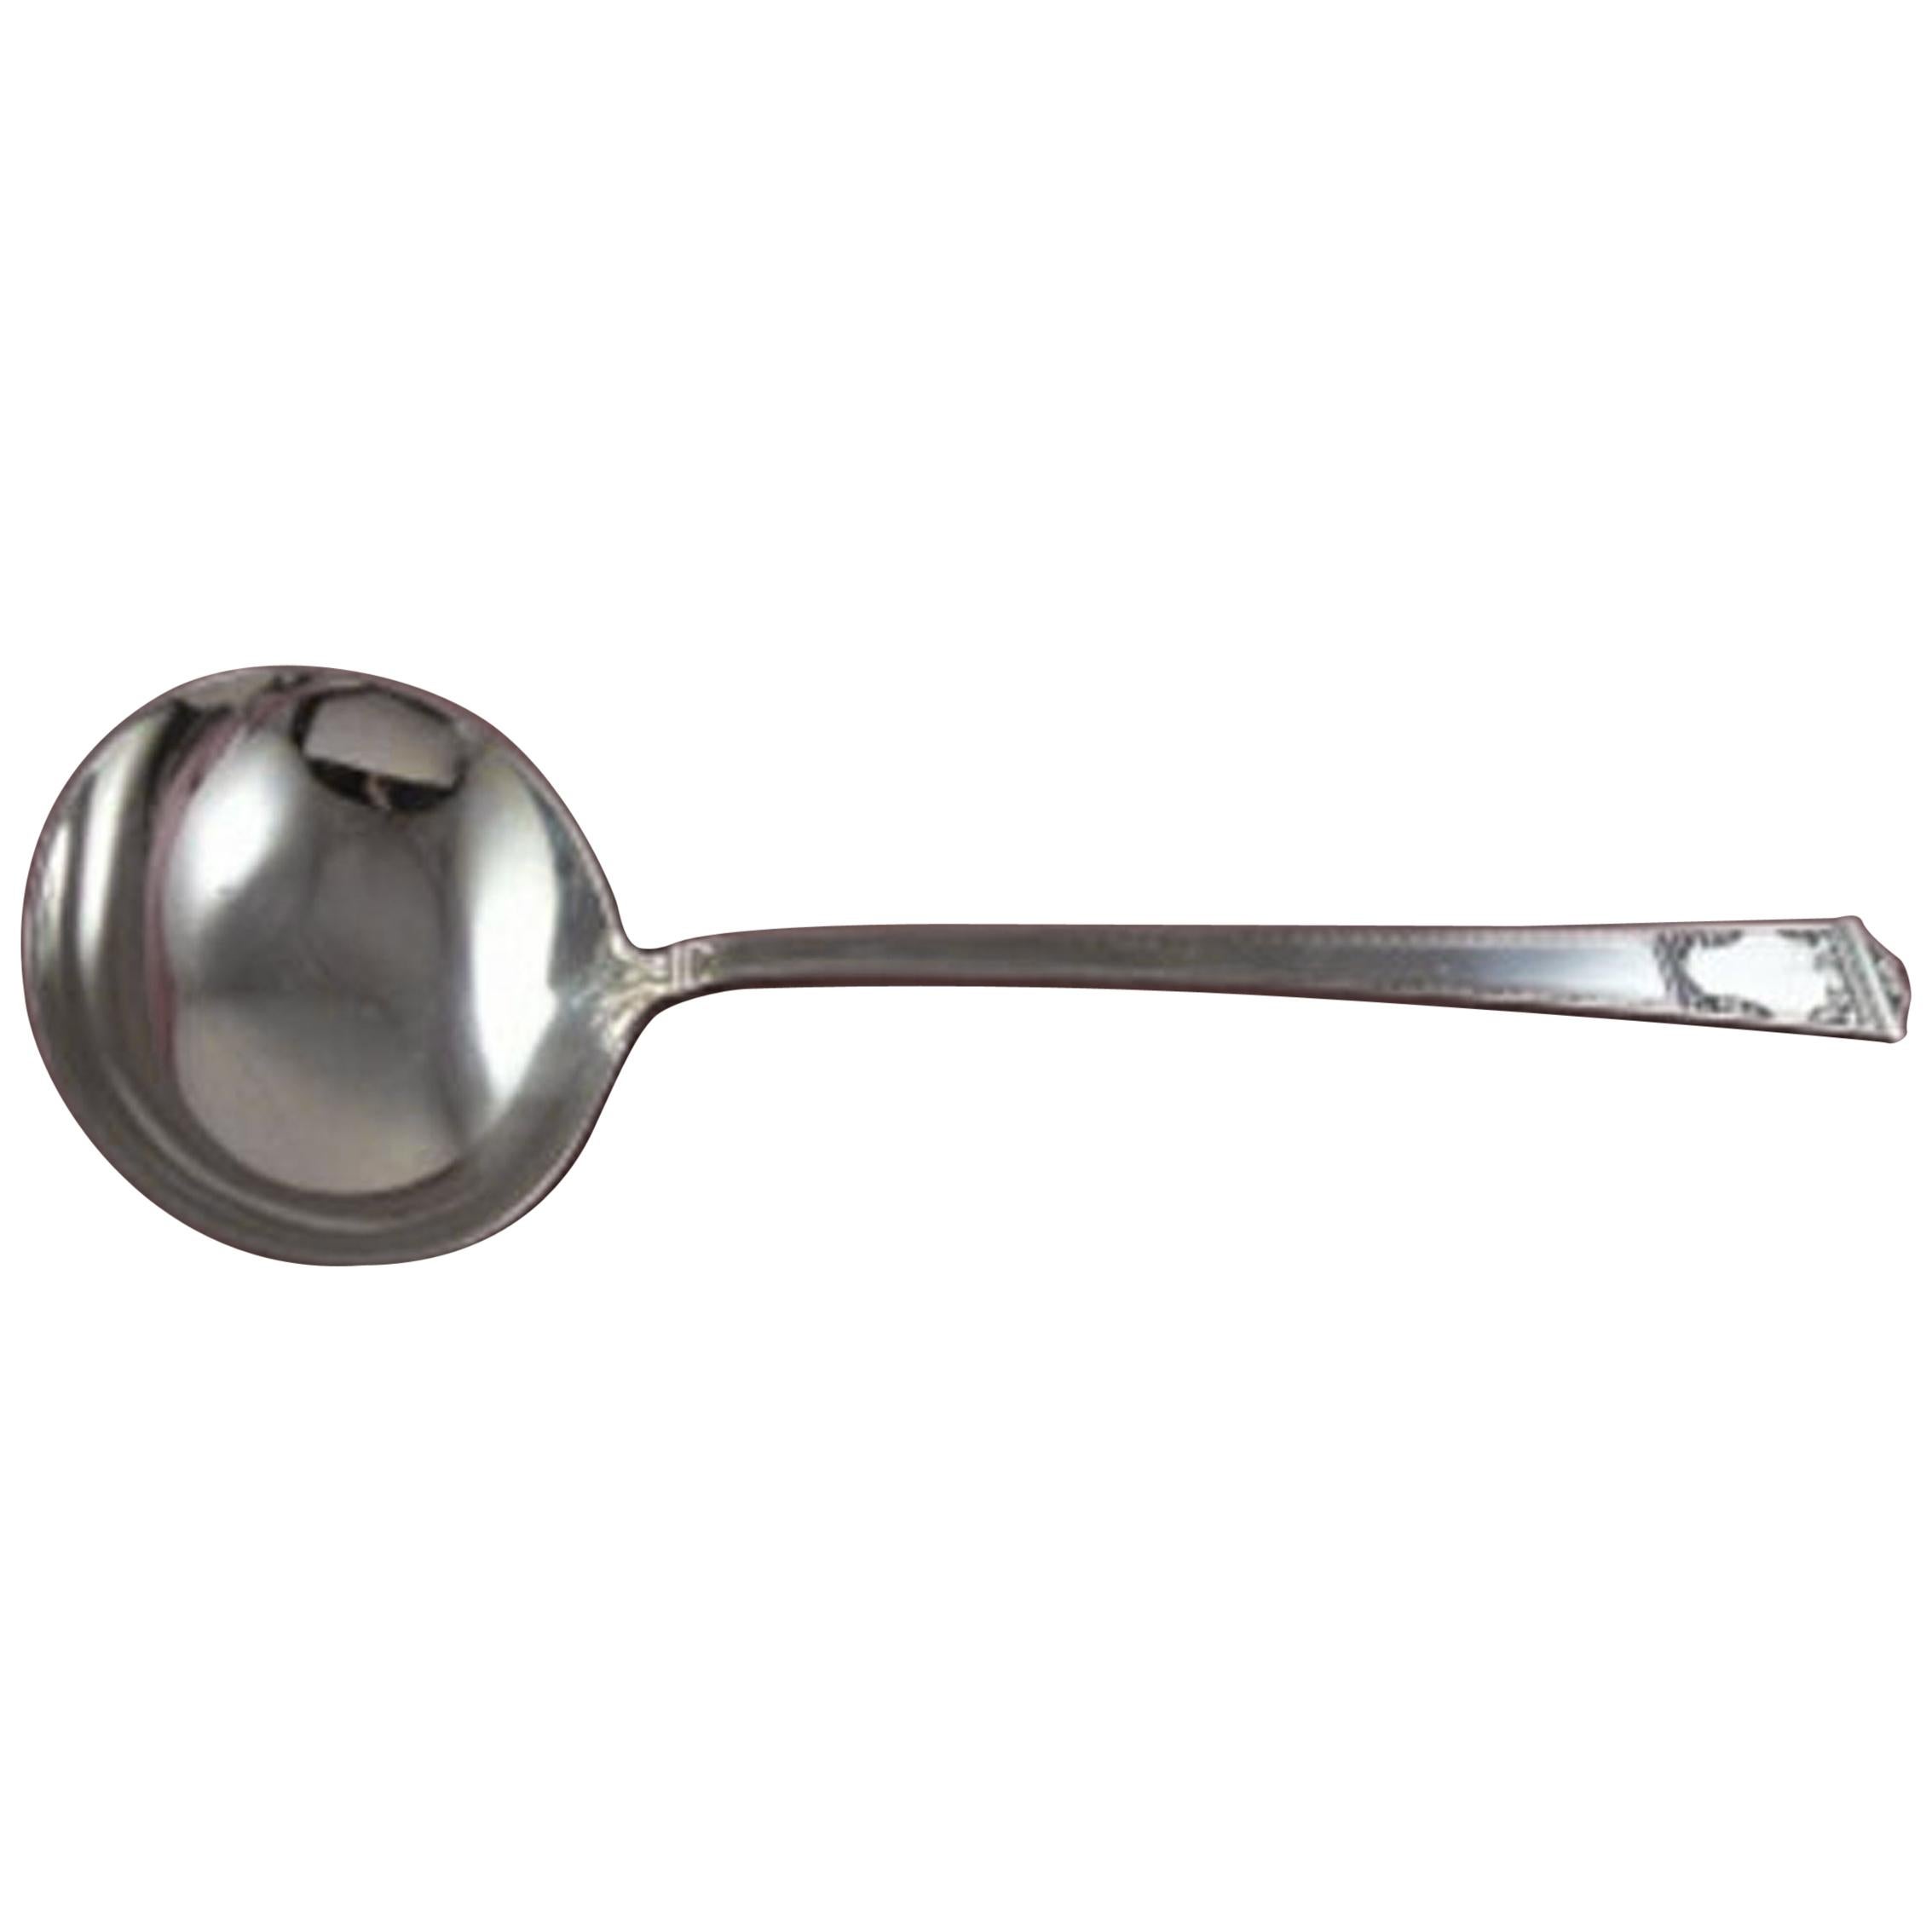 San Lorenzo by Tiffany and Co Sterling Silver Soup Ladle Original Serving